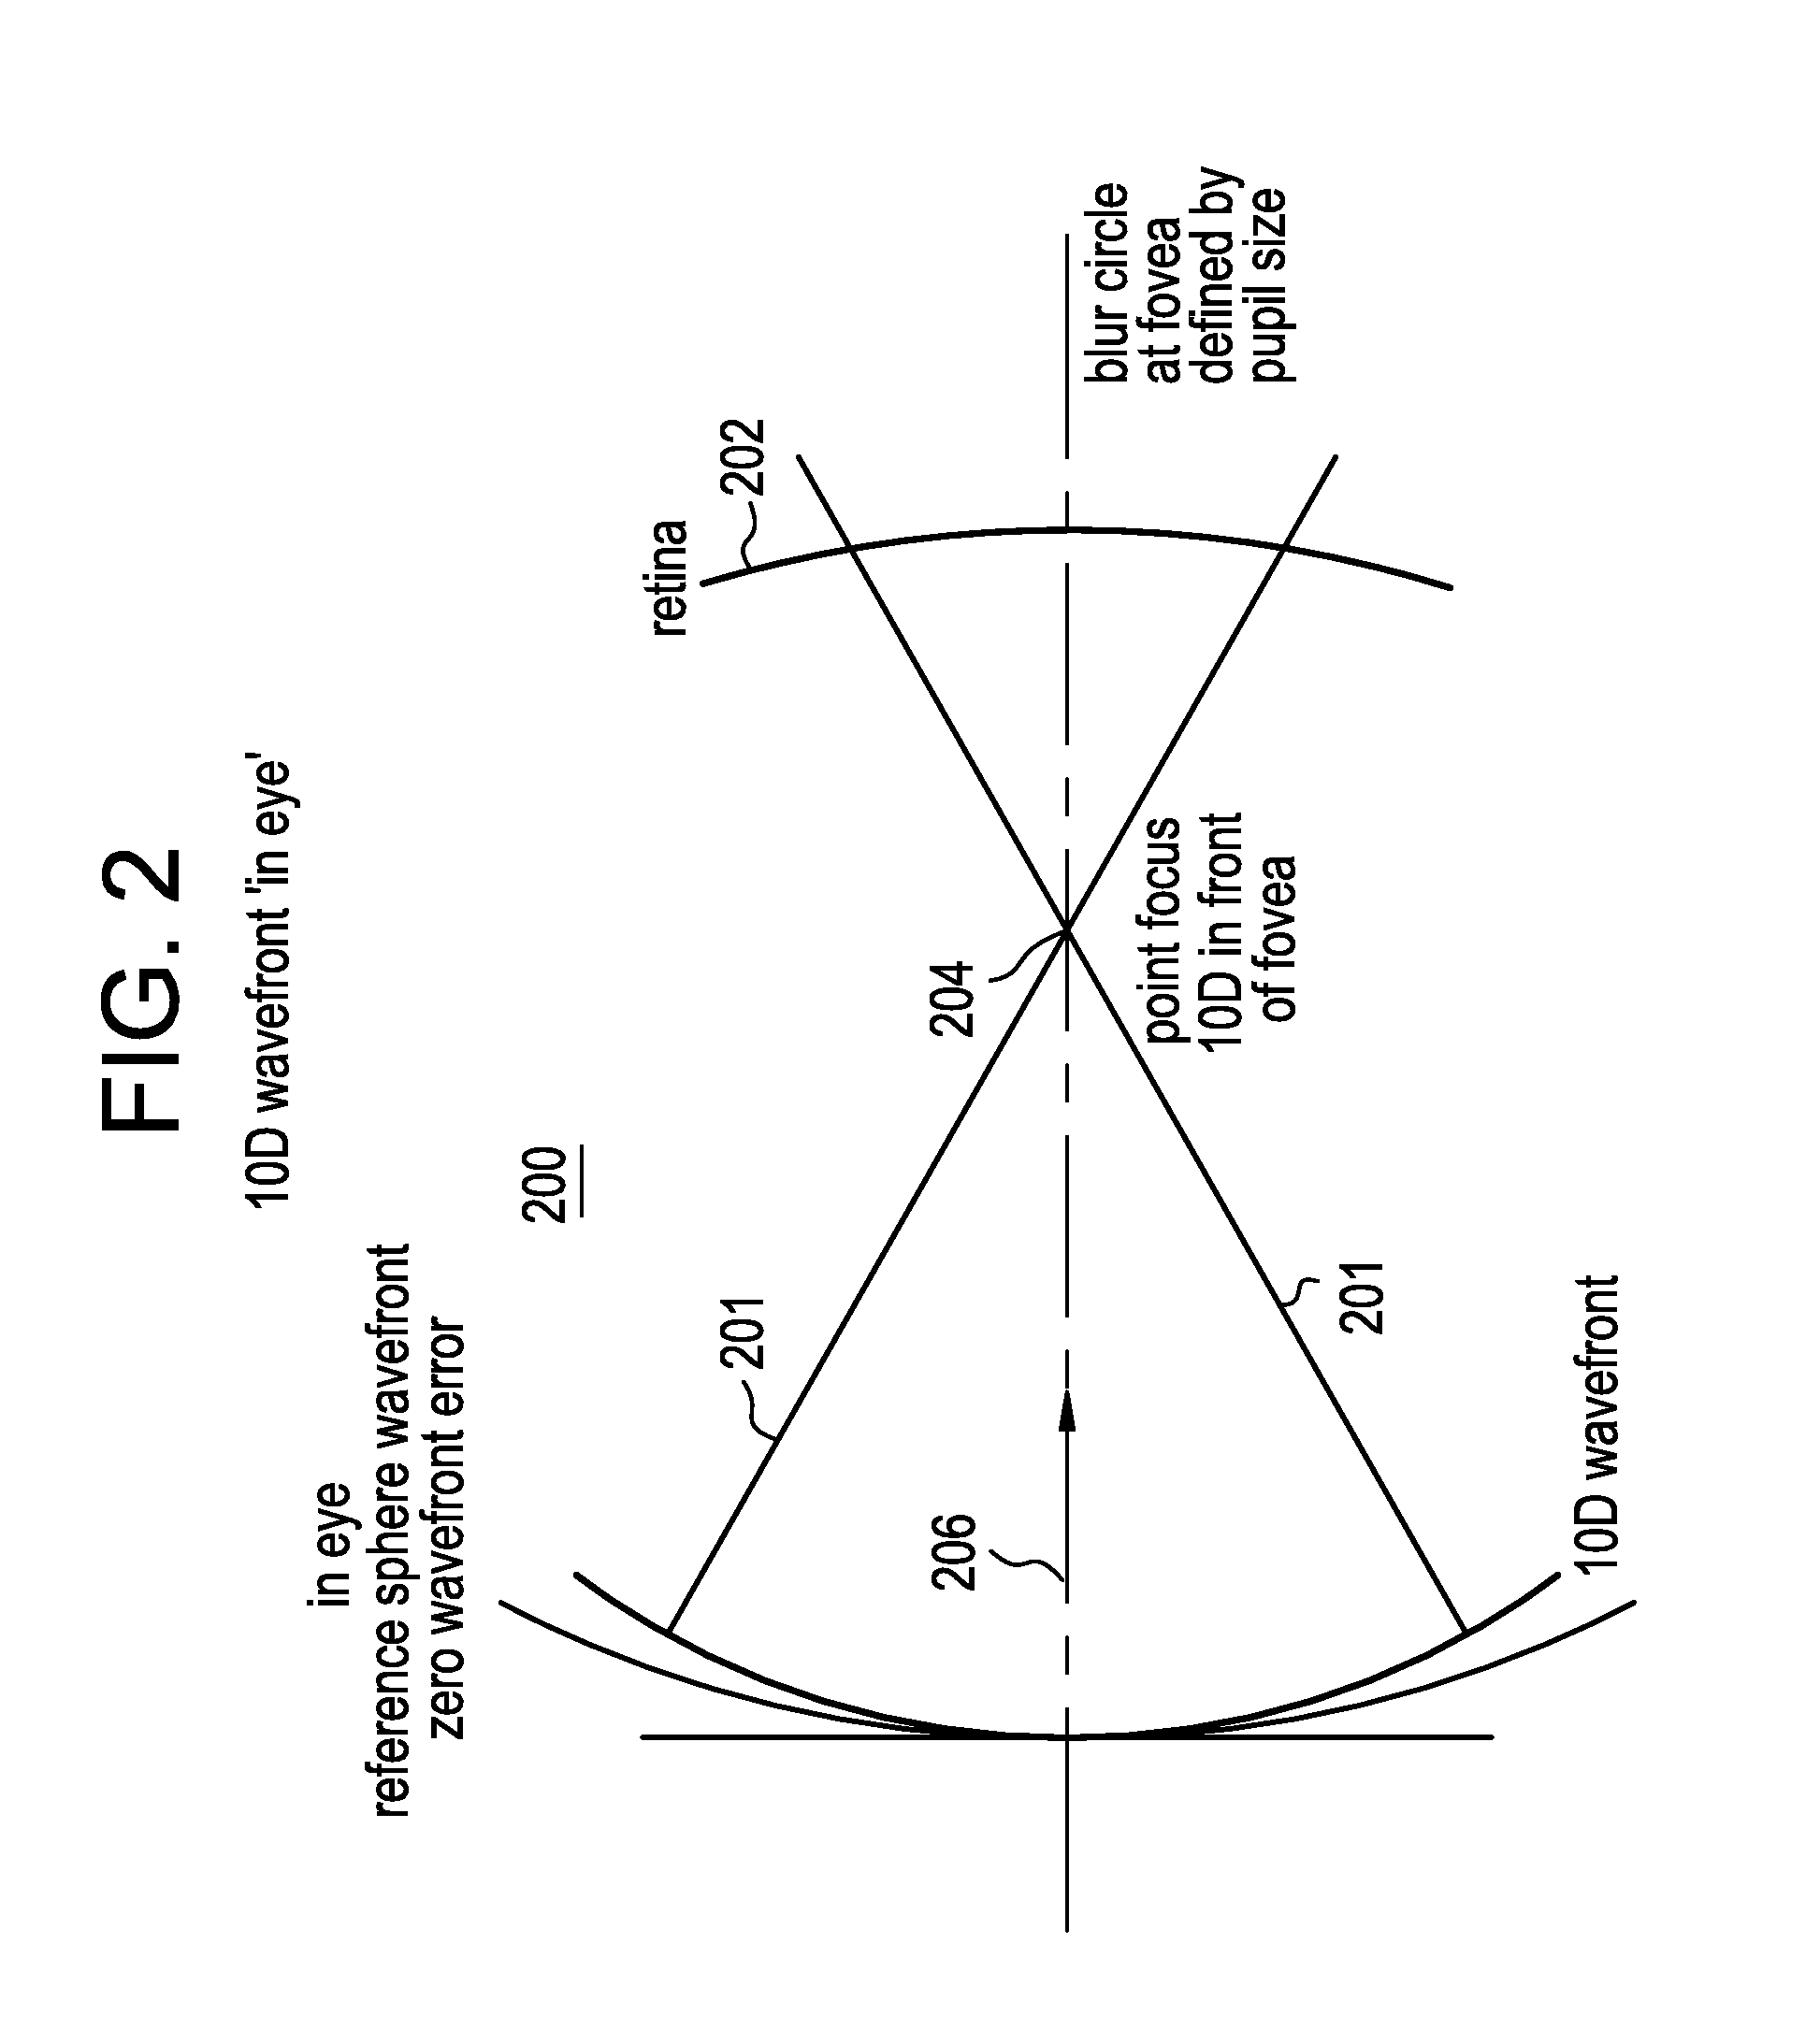 Contact lens comprising non-coaxial lenslets for preventing and/or slowing myopia progression